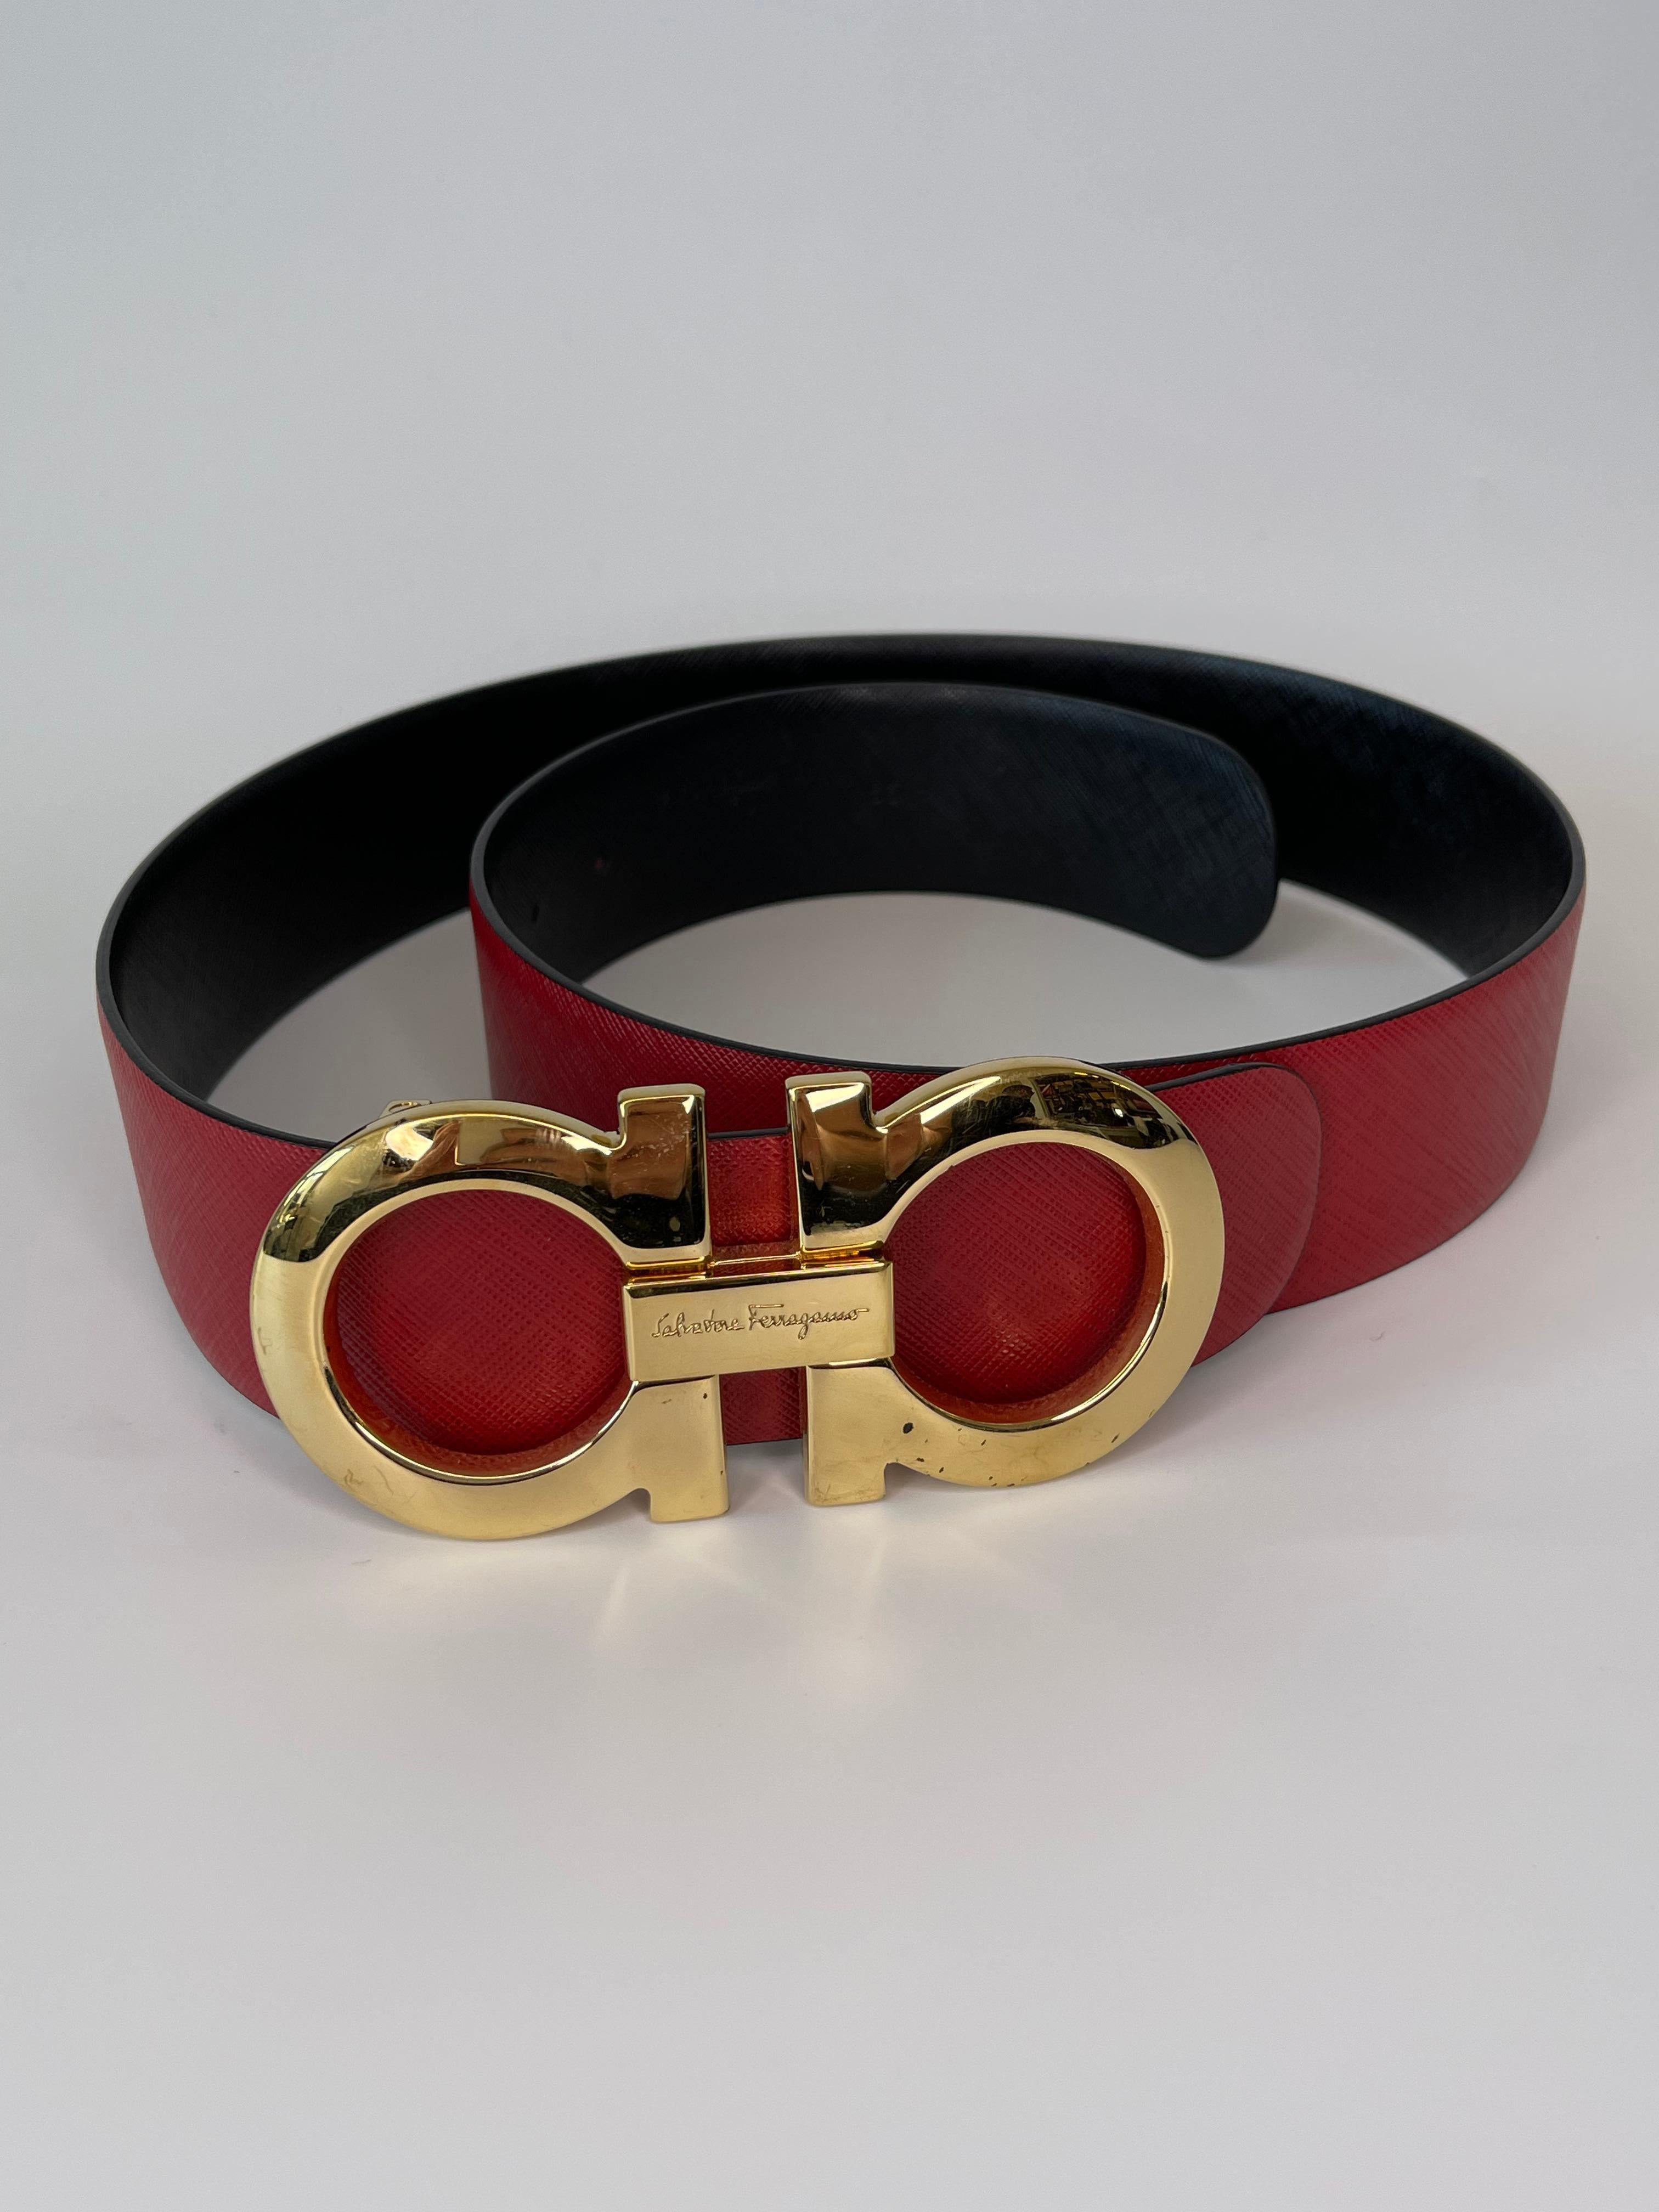 This Salvatore Ferragamo red classic belt consists of a Famous Gancini golden-tone buckle and an adjustable red leather belt body fit. The belt is reversible and can therefore be worn with either the red side or the black side showing. 

COLOR: